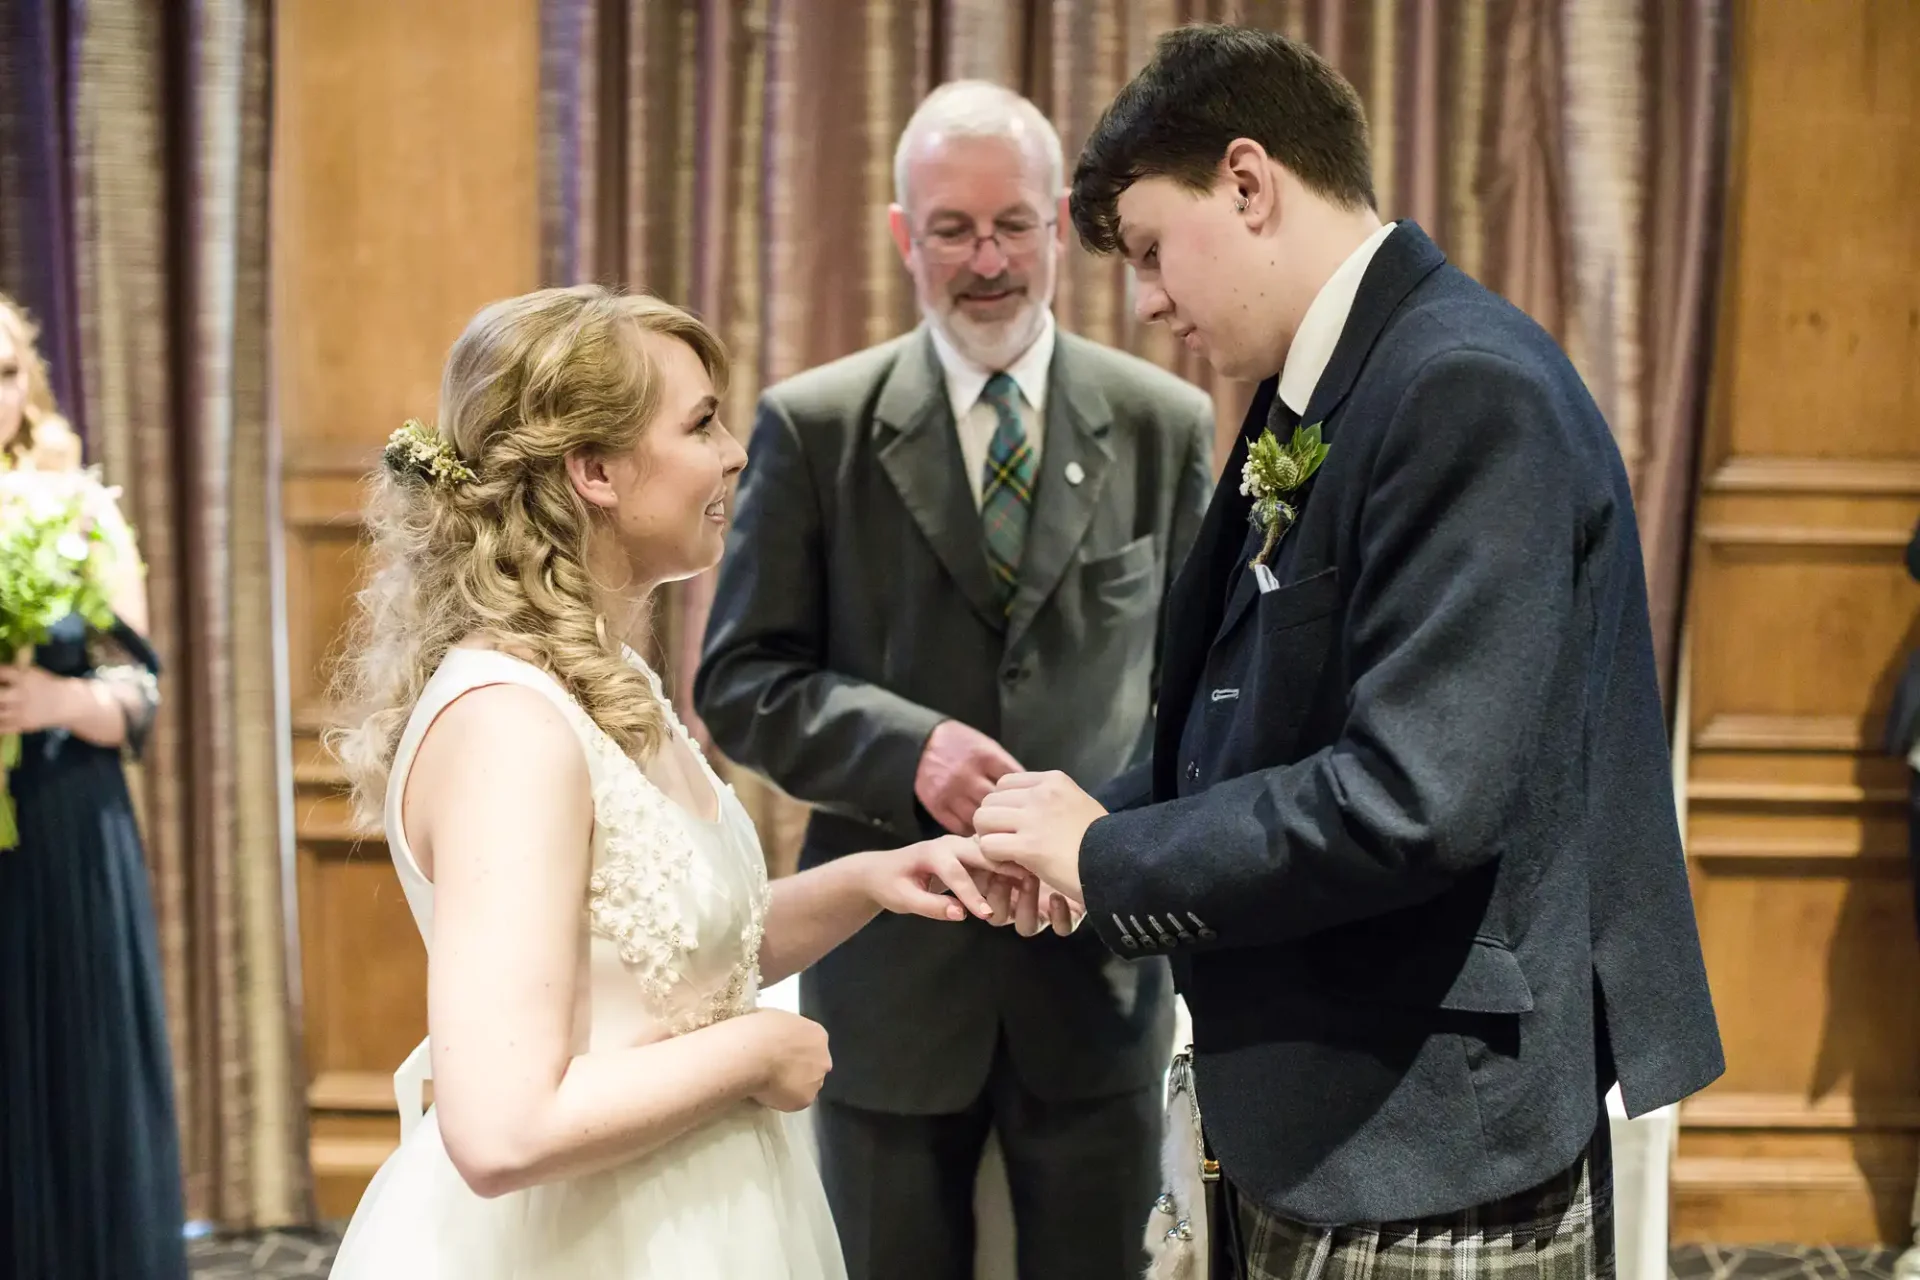 A bride and groom exchange rings at their wedding ceremony, with an officiant and bridesmaid in the background.